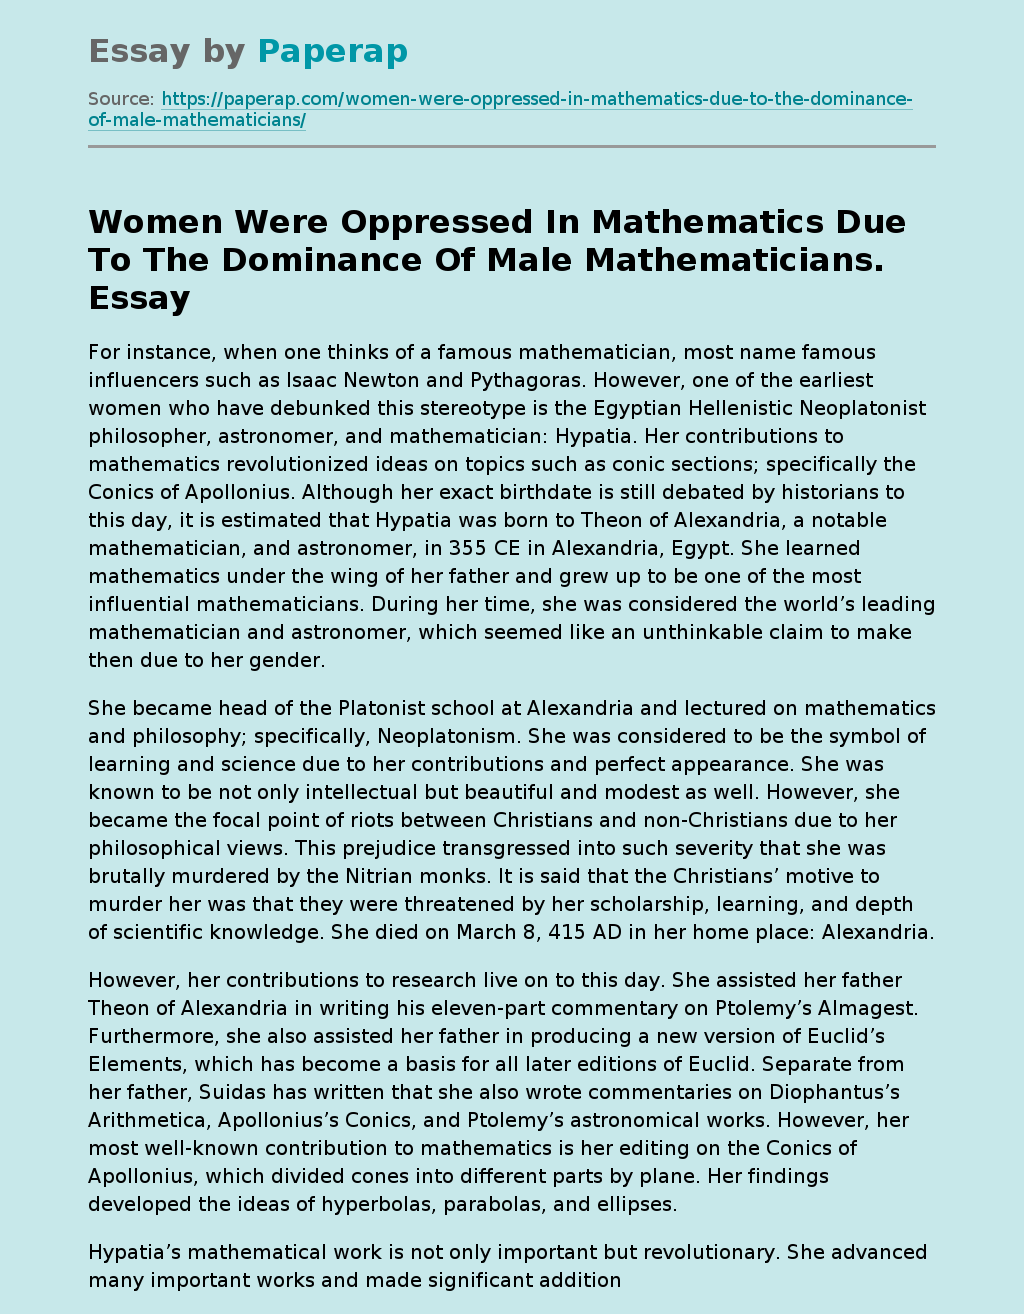 Women Were Oppressed In Mathematics Due To The Dominance Of Male Mathematicians.